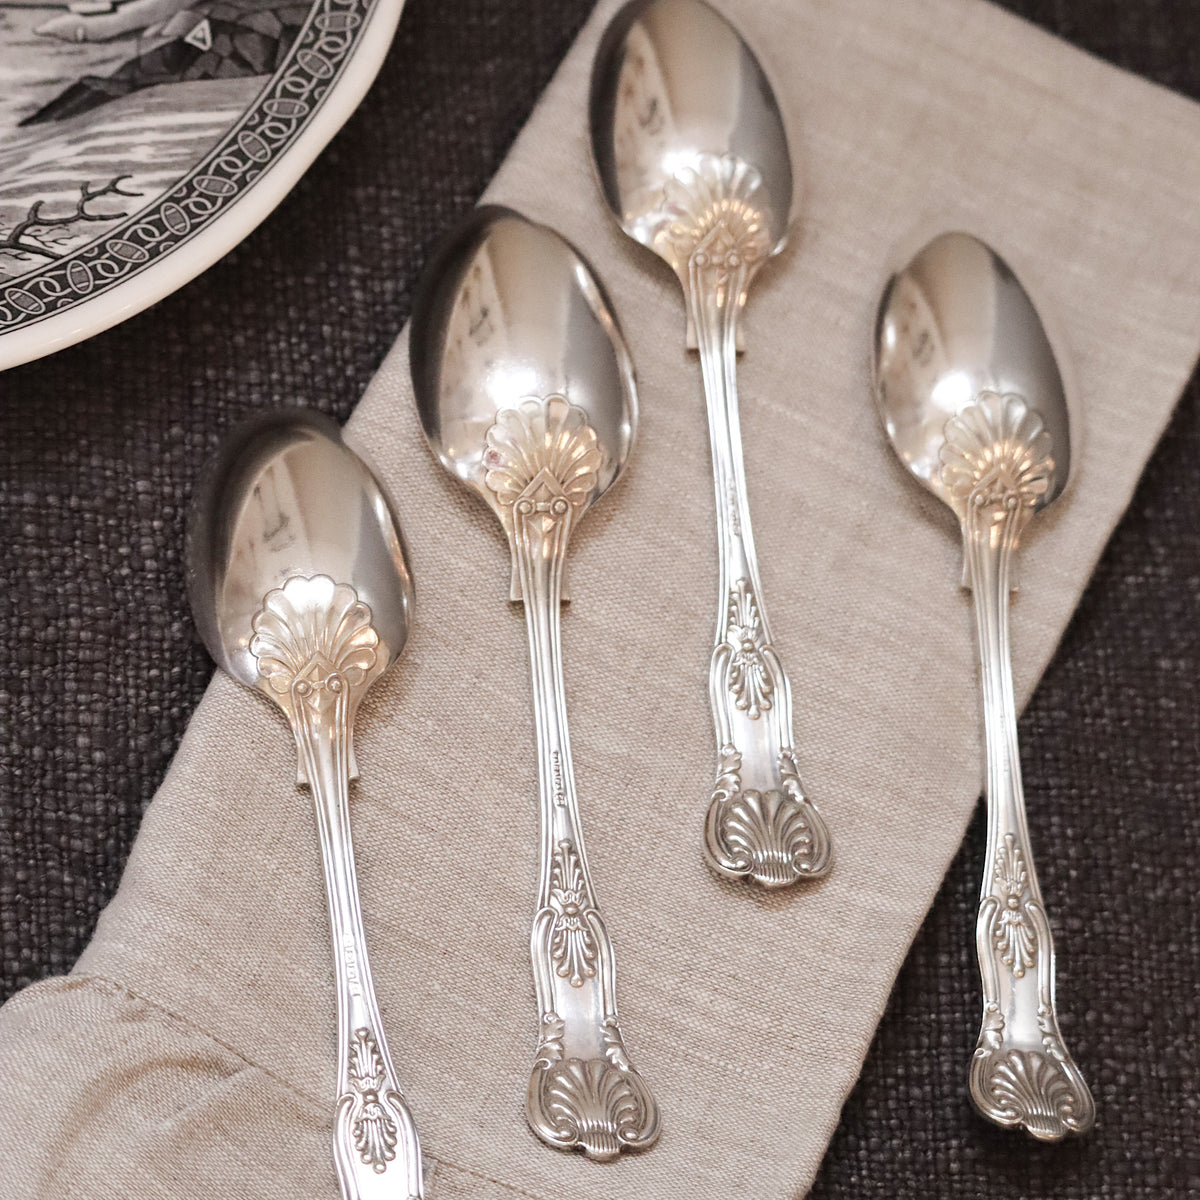 Kings Pattern Shell set of 4 spoons